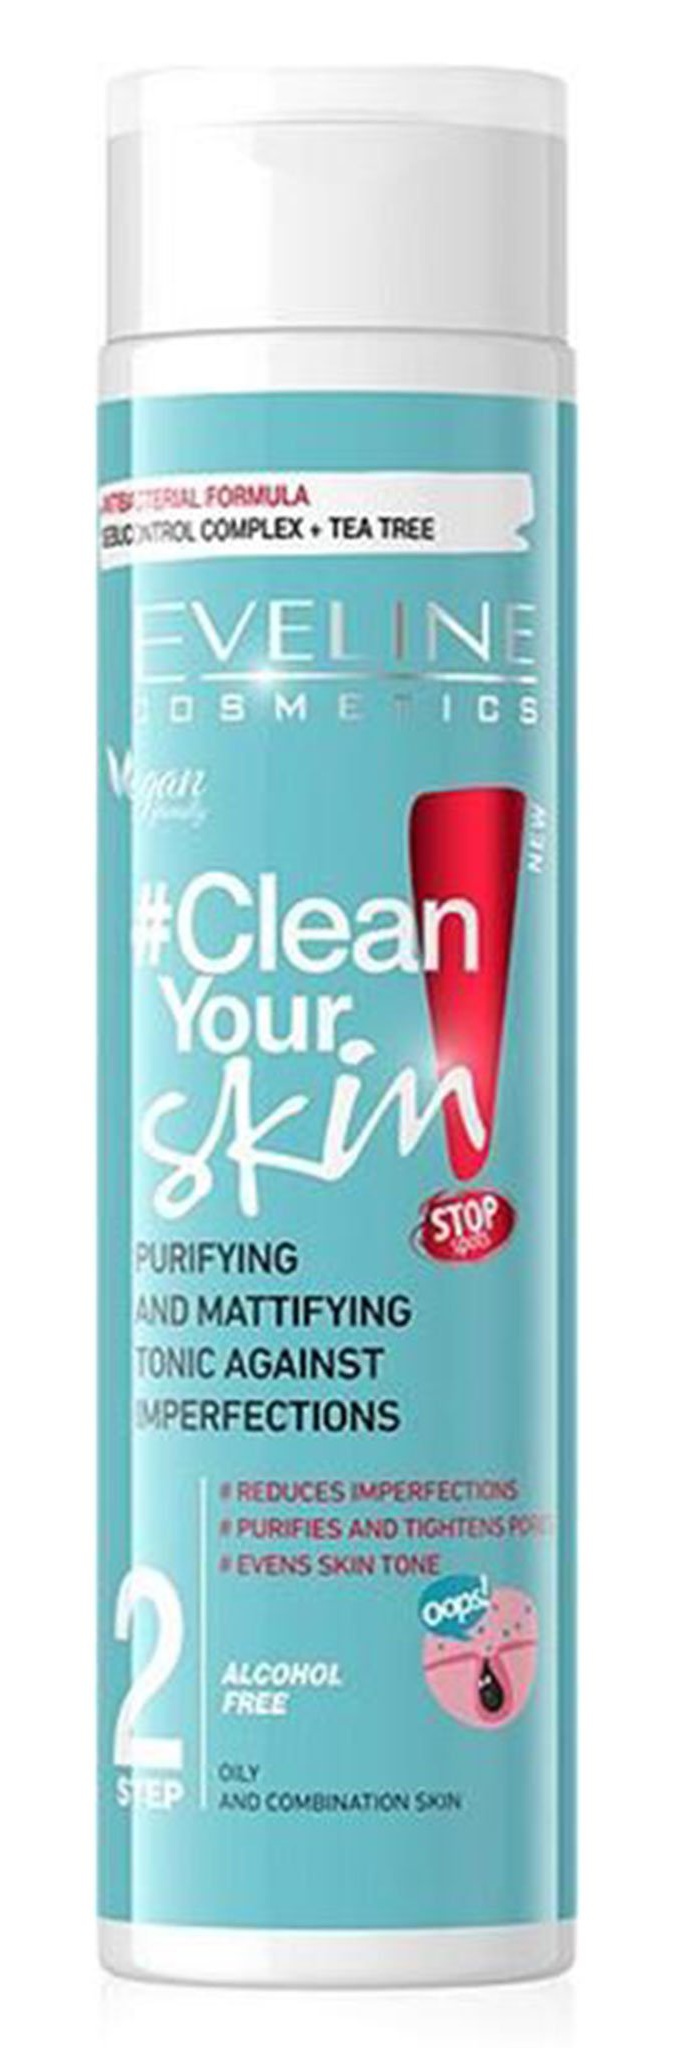 Eveline Clean Your Skin Tonic